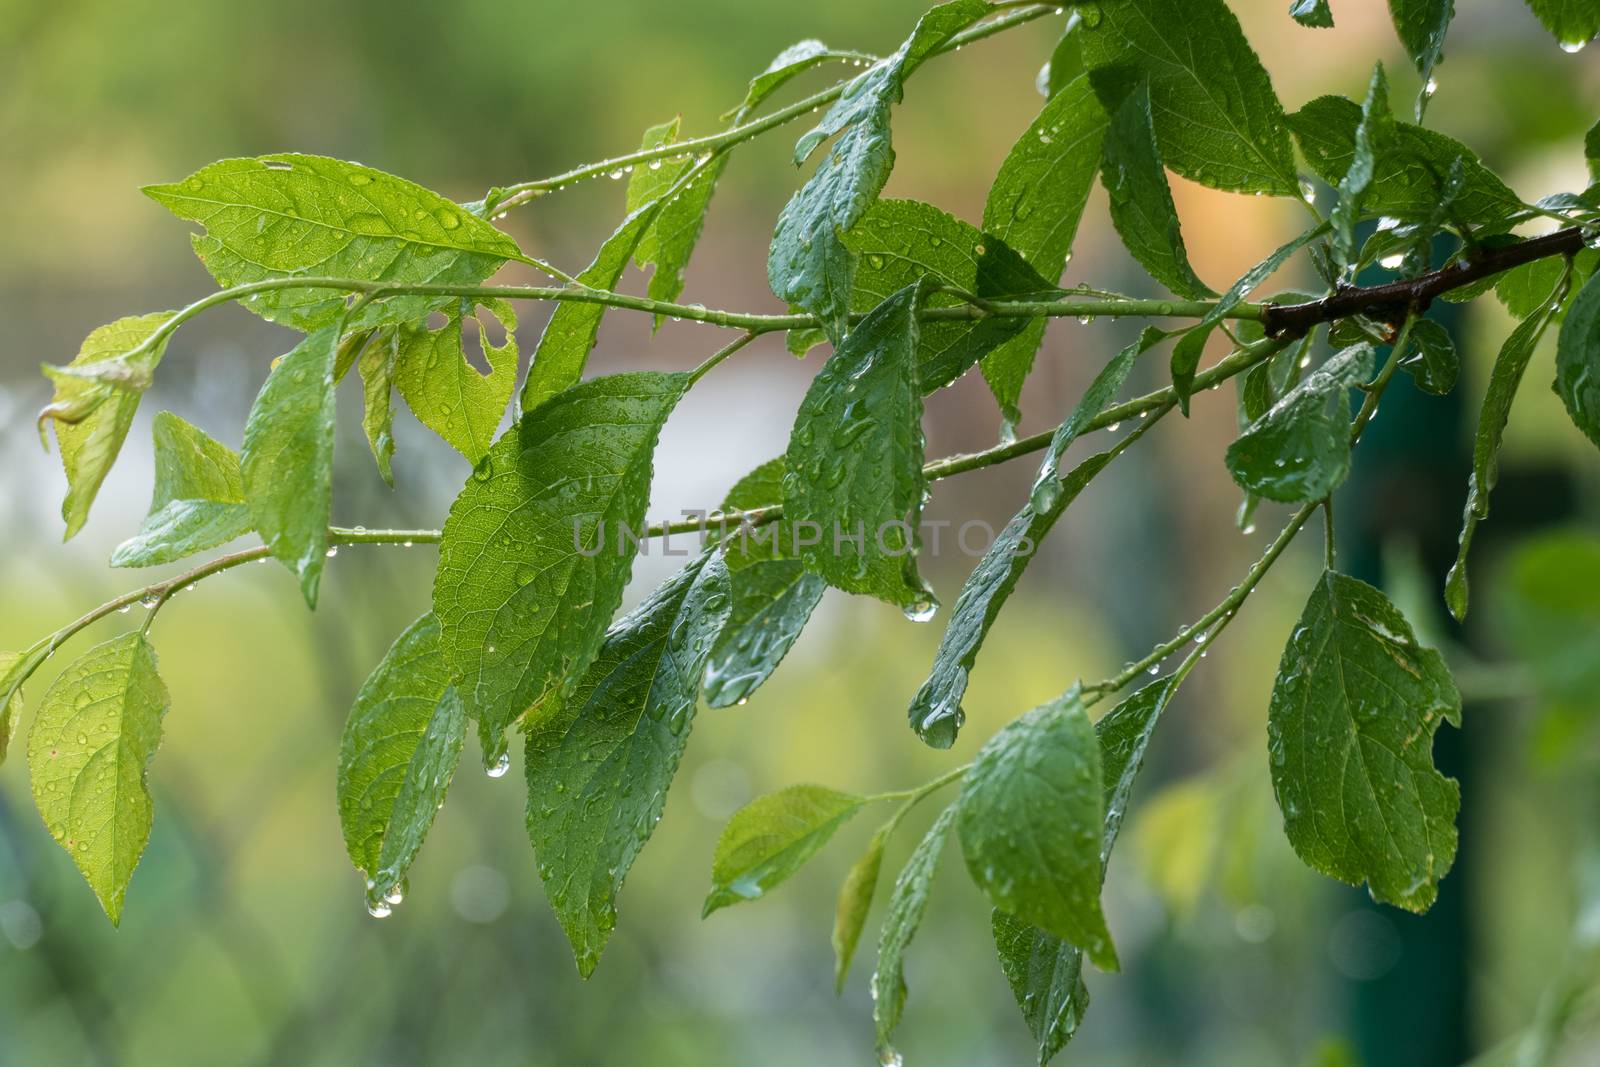 green plum leaves after rain in summer garden by L86